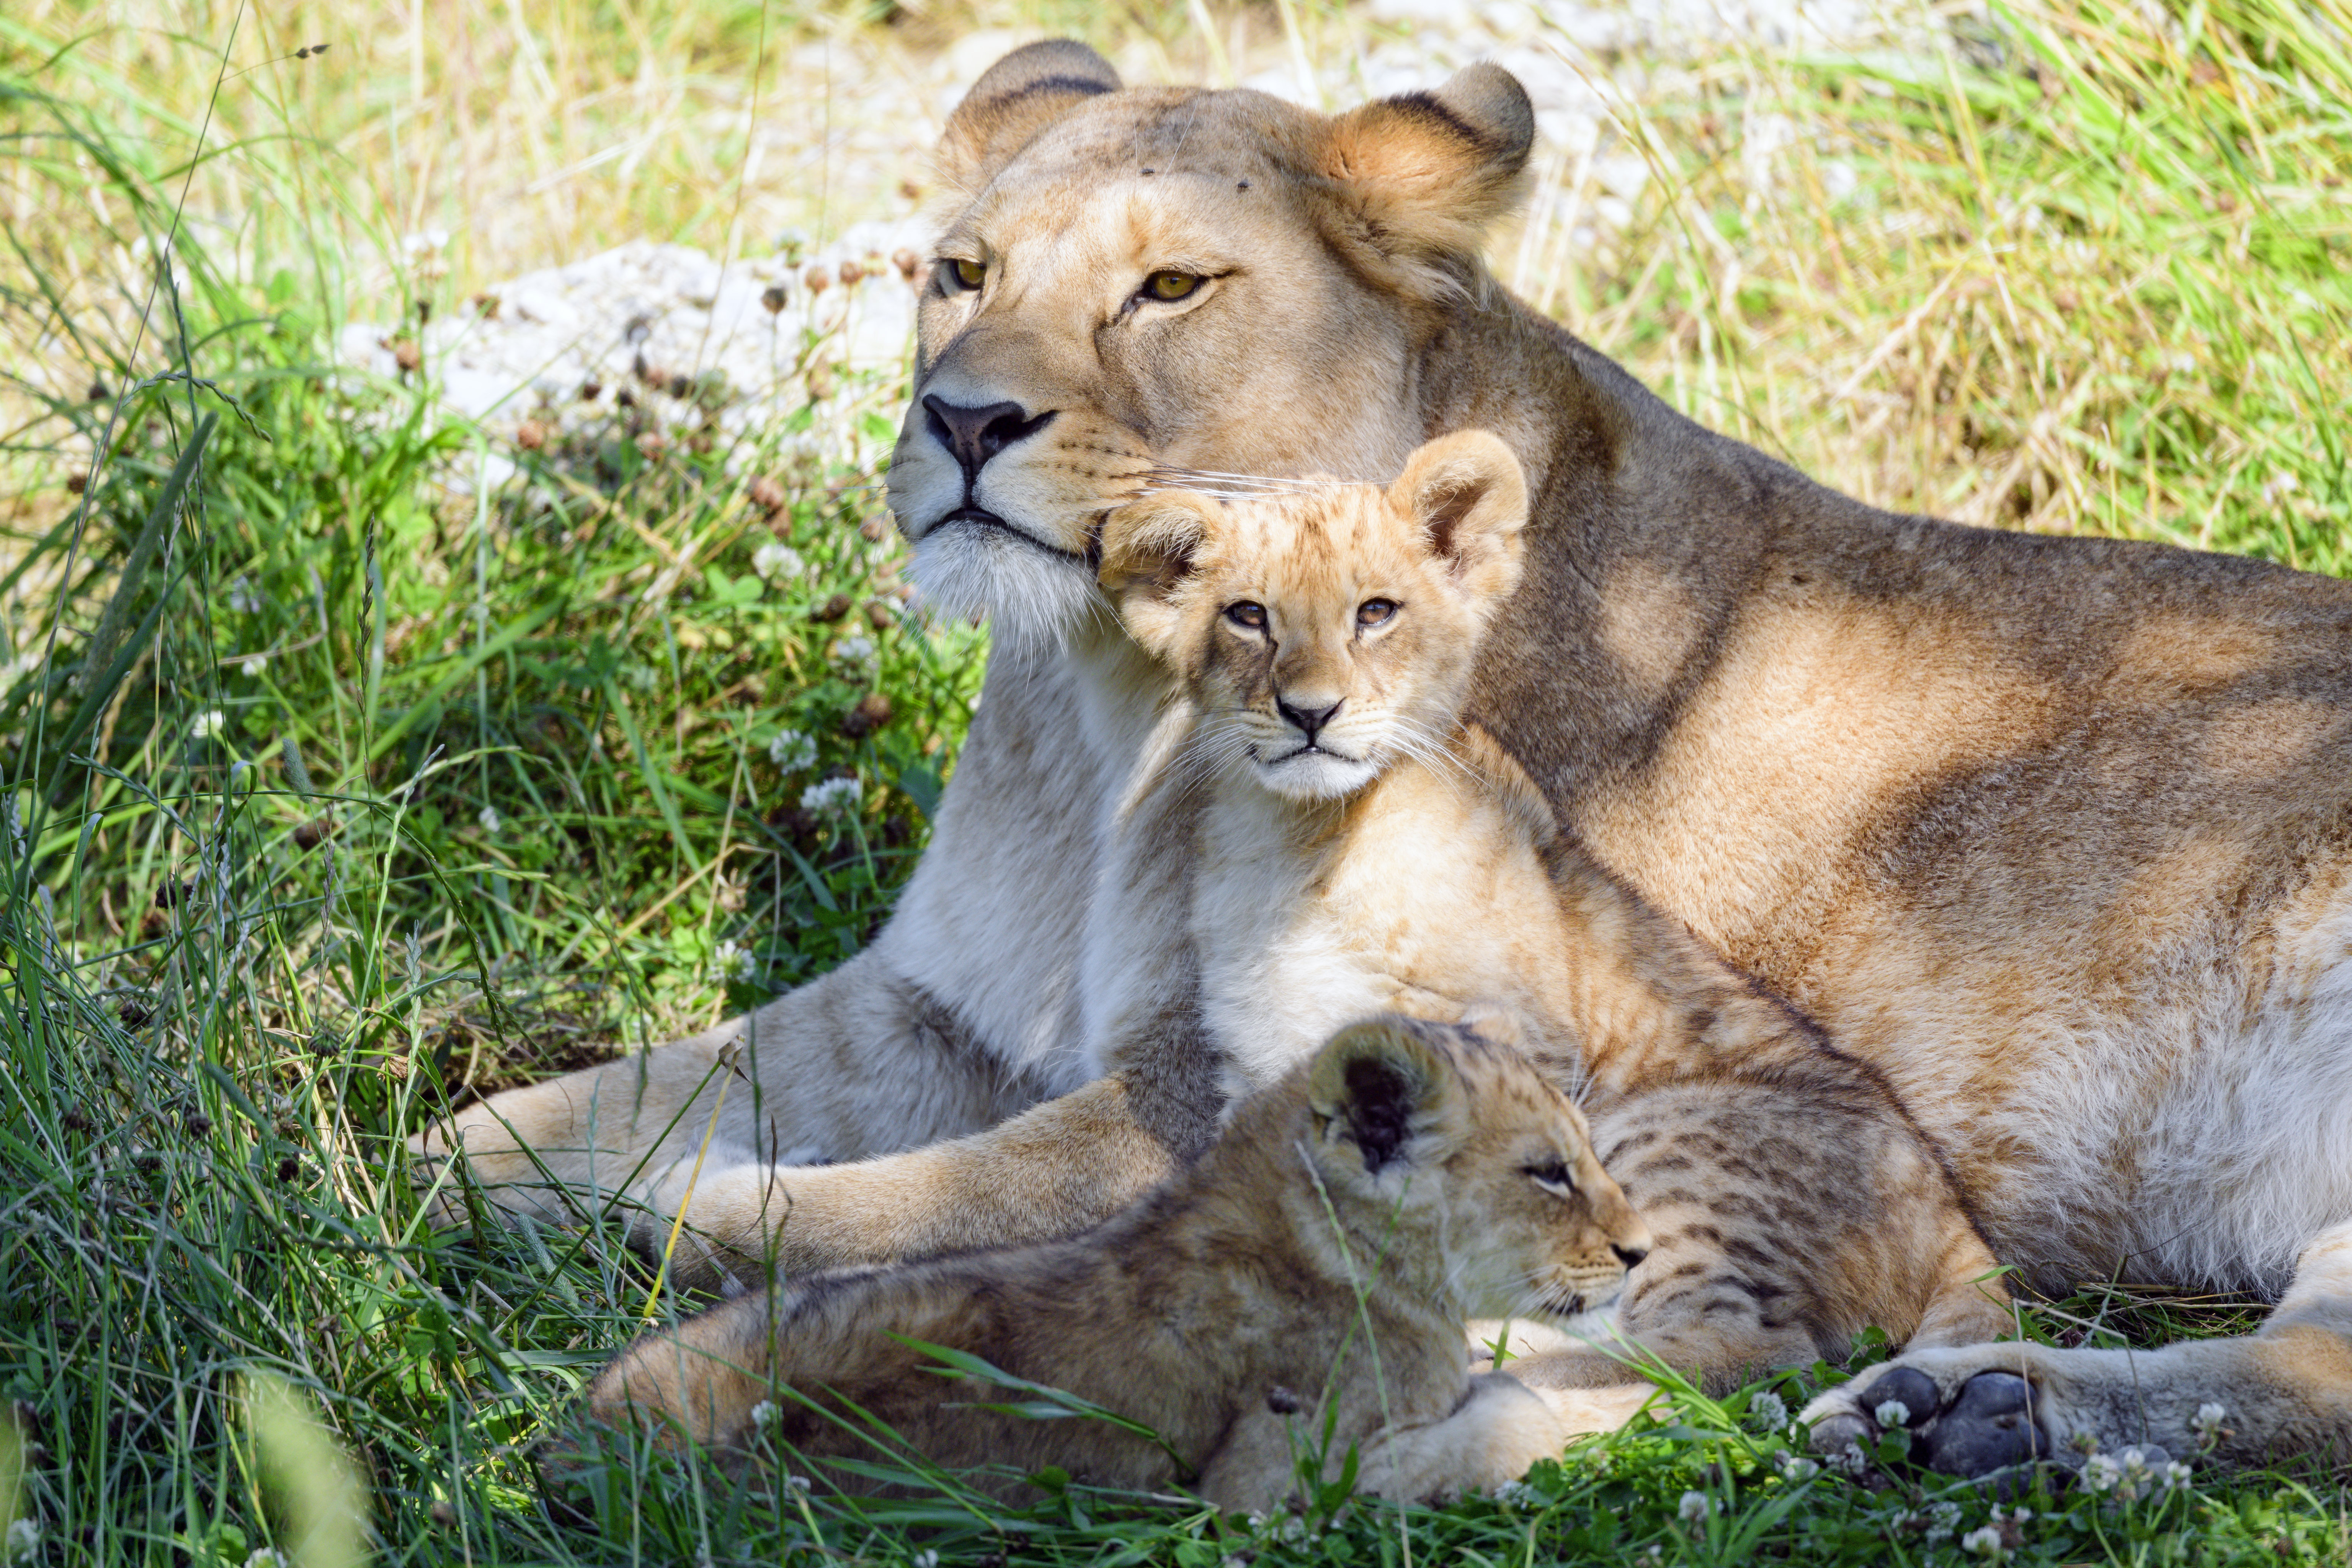 family, care, animals, grass, young, lioness, nice, joey, nicely